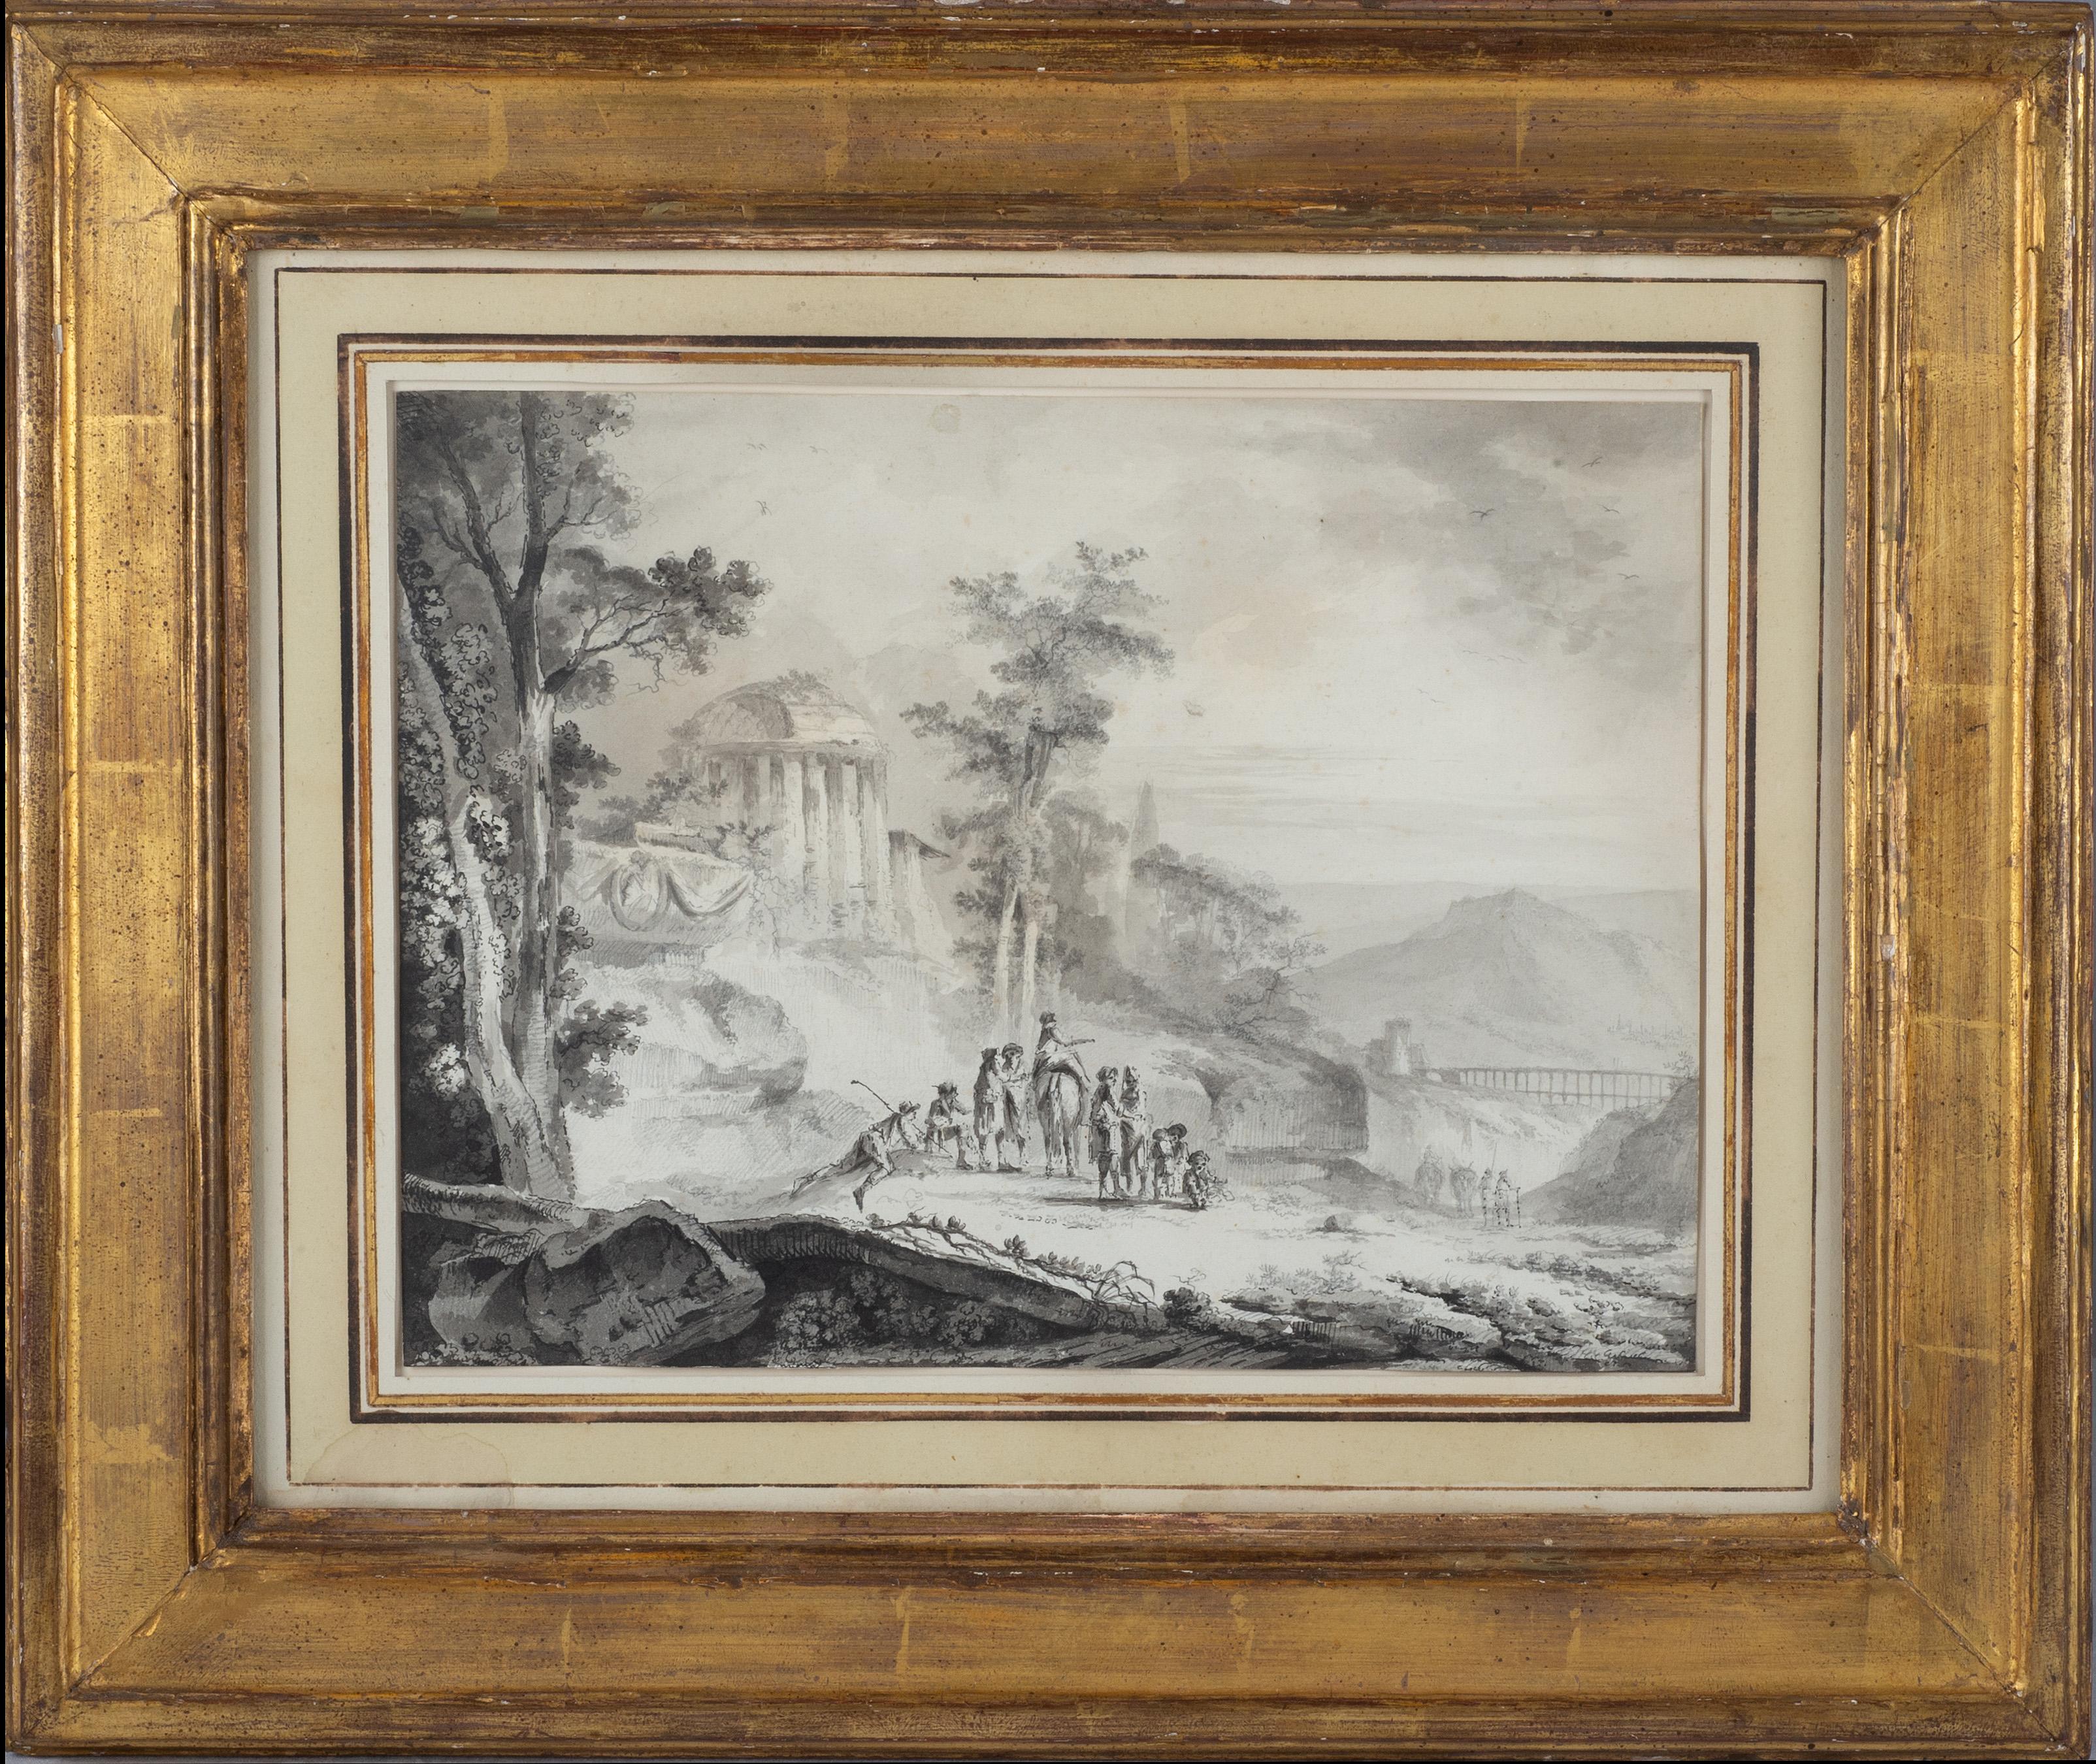 Pair of landscape drawings, one showing a country outing with mountains and ruins in the background, the other showing characters in an imaginary setting of ruins.
Ink and wash on paper.
Sight size of each drawing is 9 1/4in. by 12 1/4in. 

The